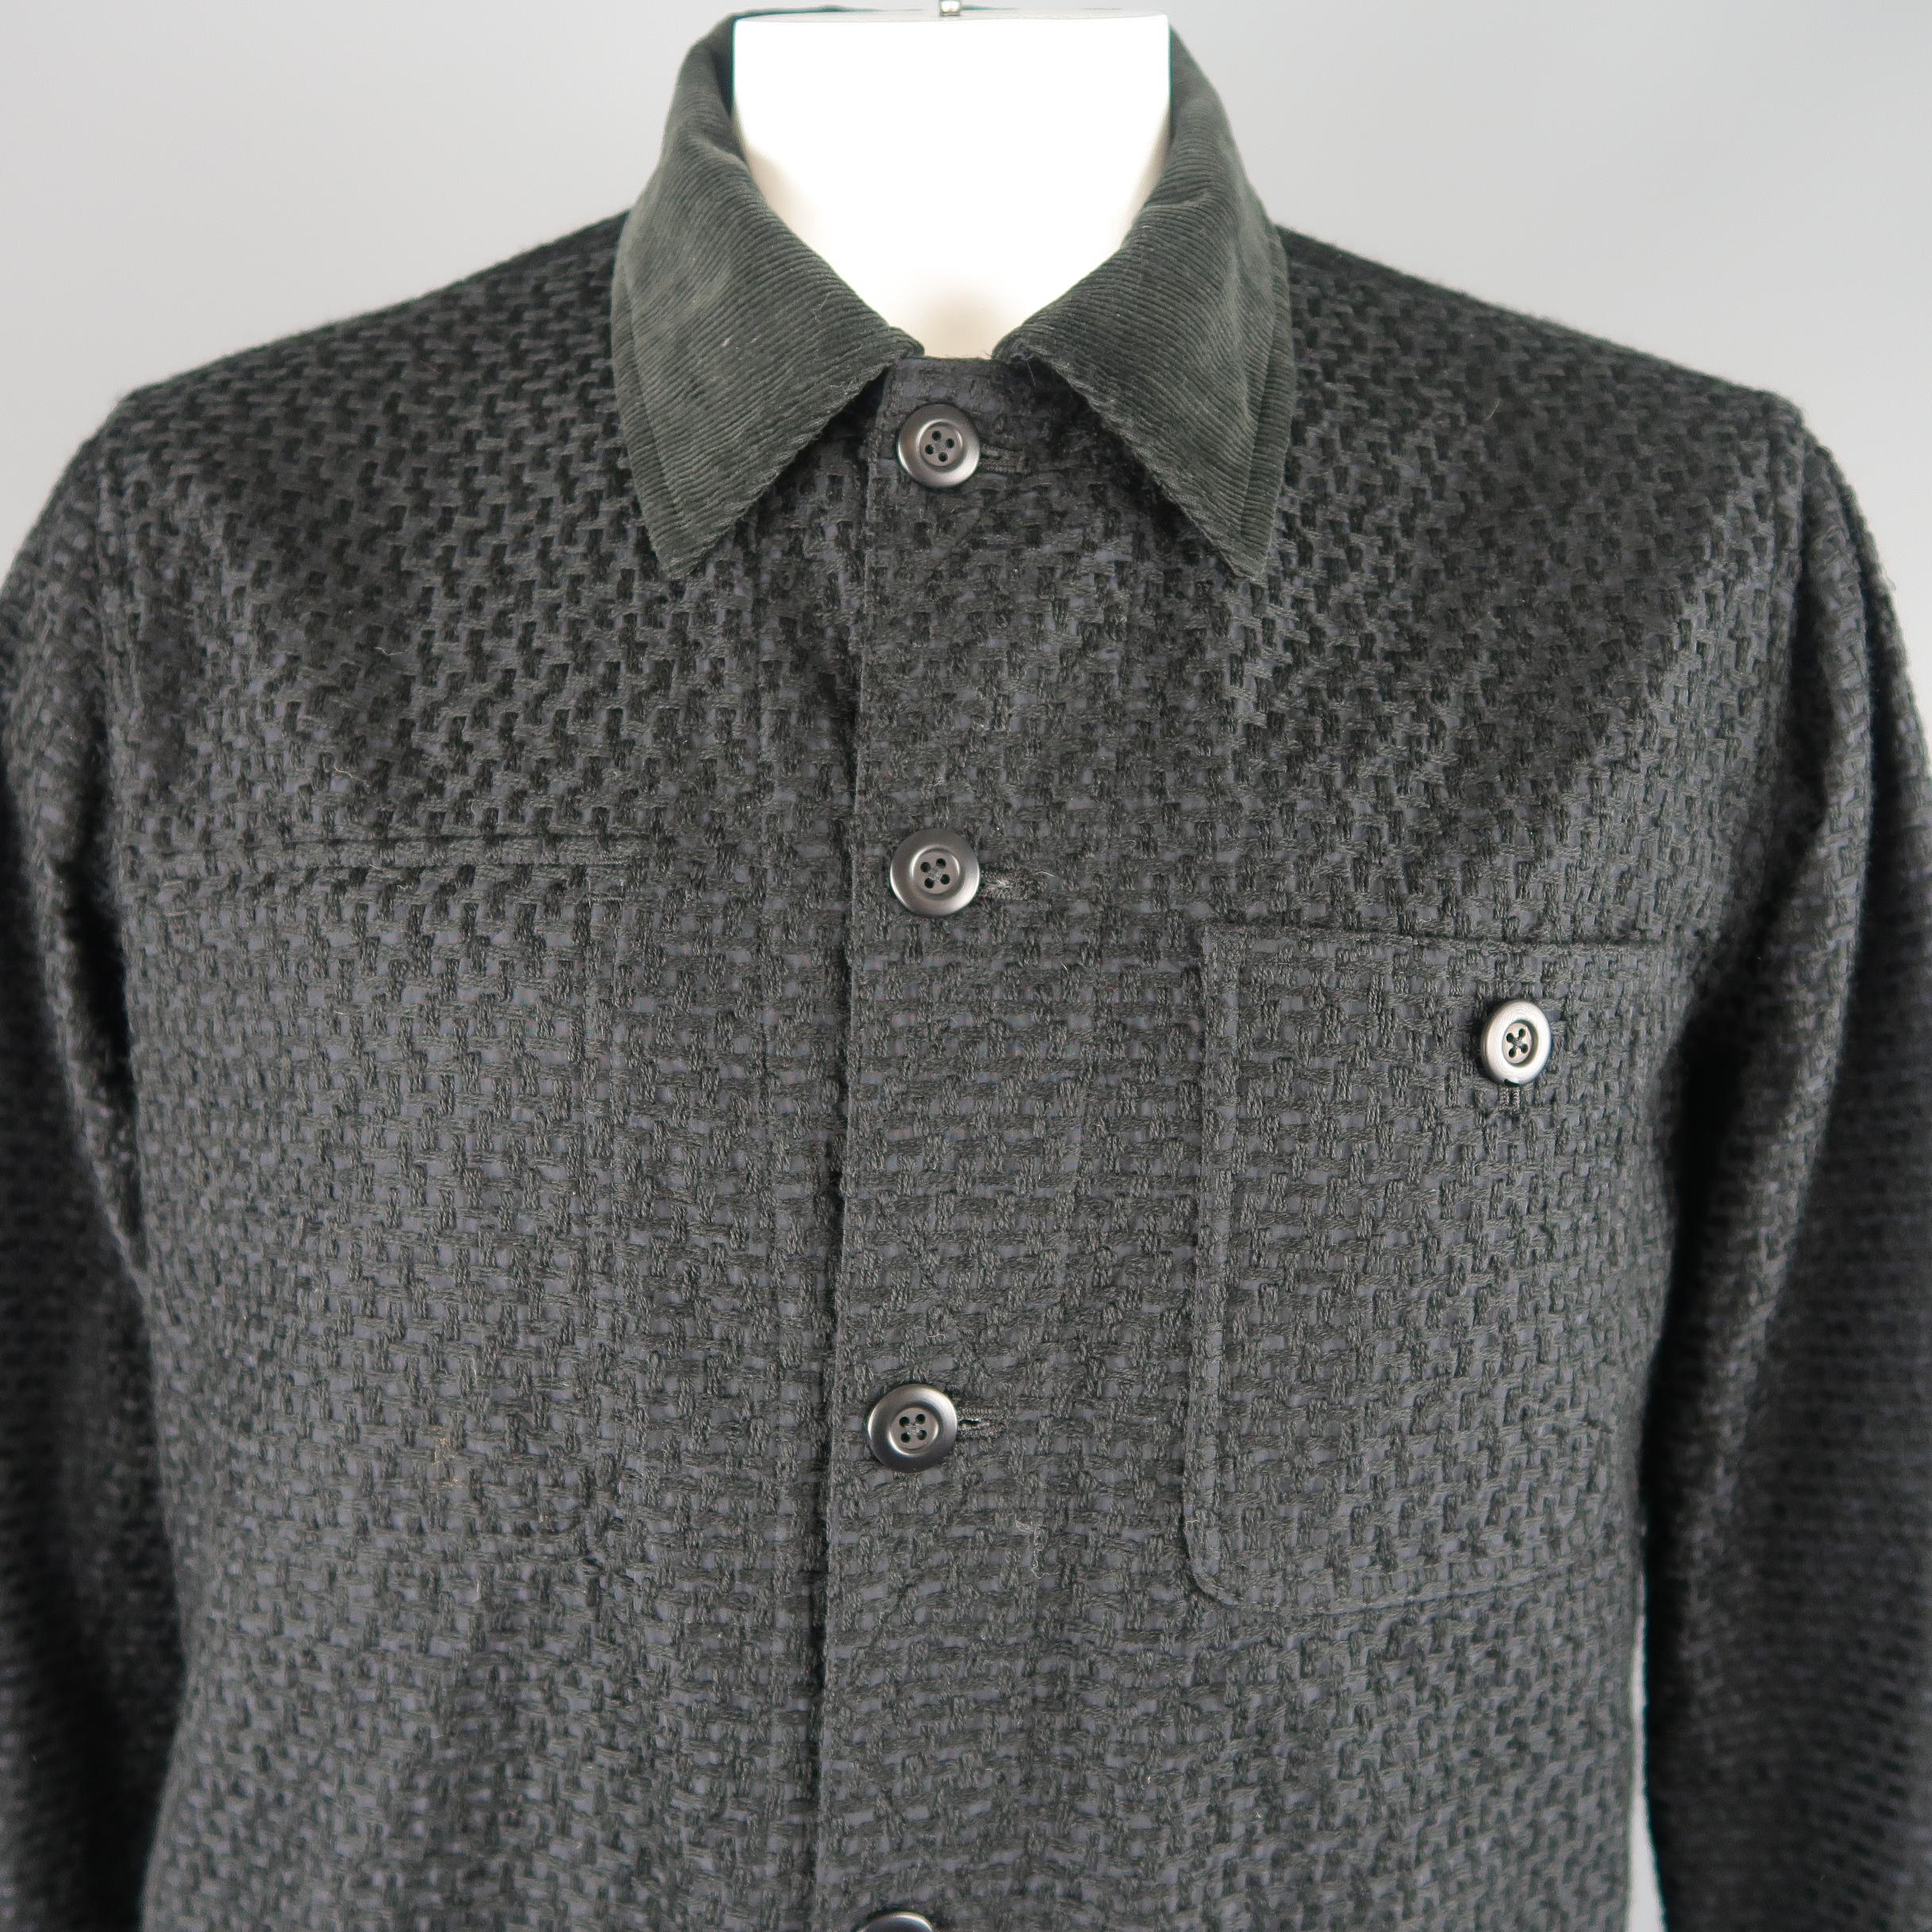 TS(S) long jacket comes in a woven textured wool blend fabric with a button up front, pointed corduroy collar, and triple patch pockets. Made in Japan.
 
Excellent Pre-Owned Condition.
Marked: JP 4
 
Measurements:
 
Shoulder: 18 in.
Chest: 46